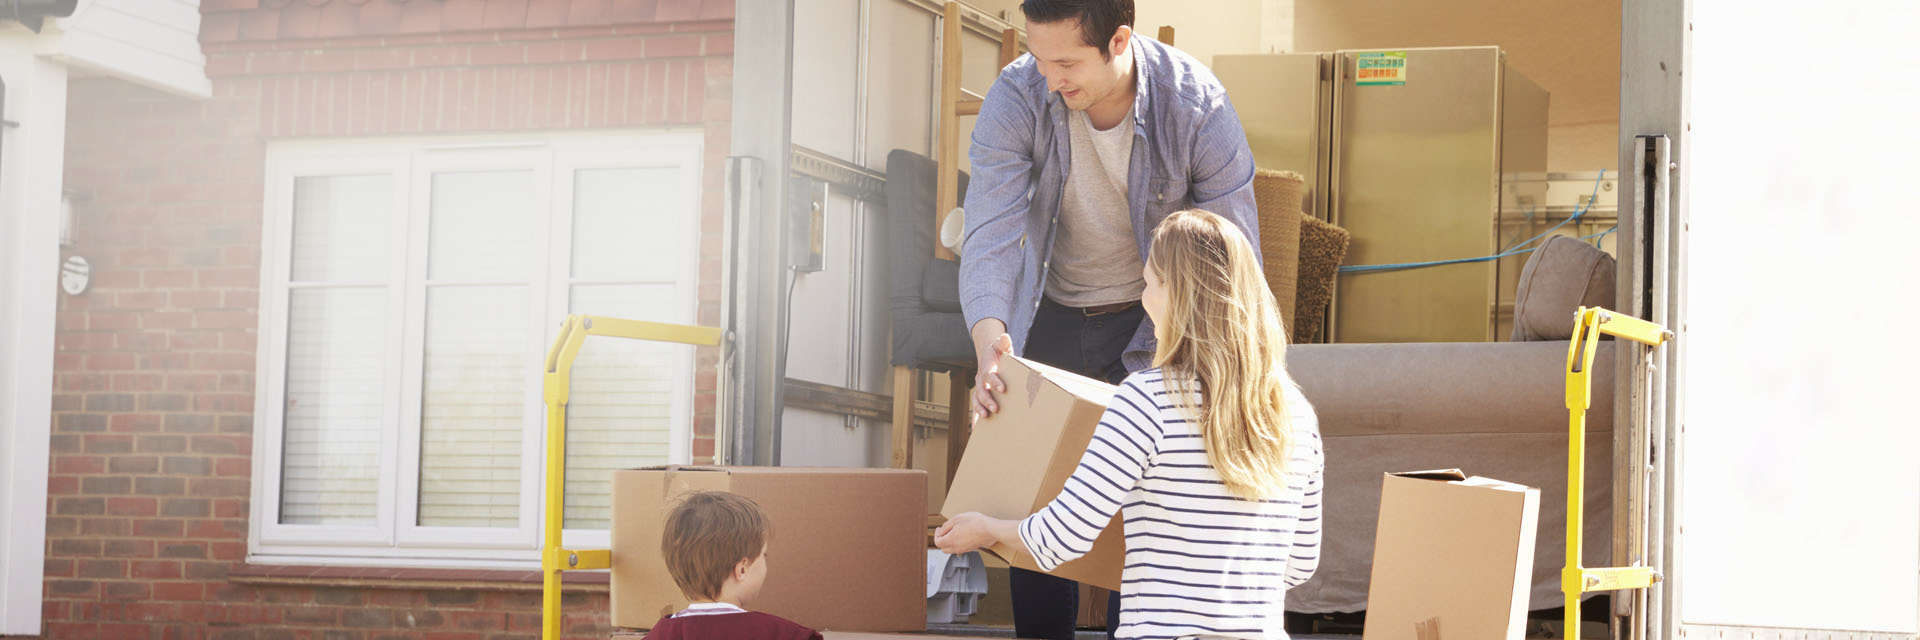 Image showing a family moving  home